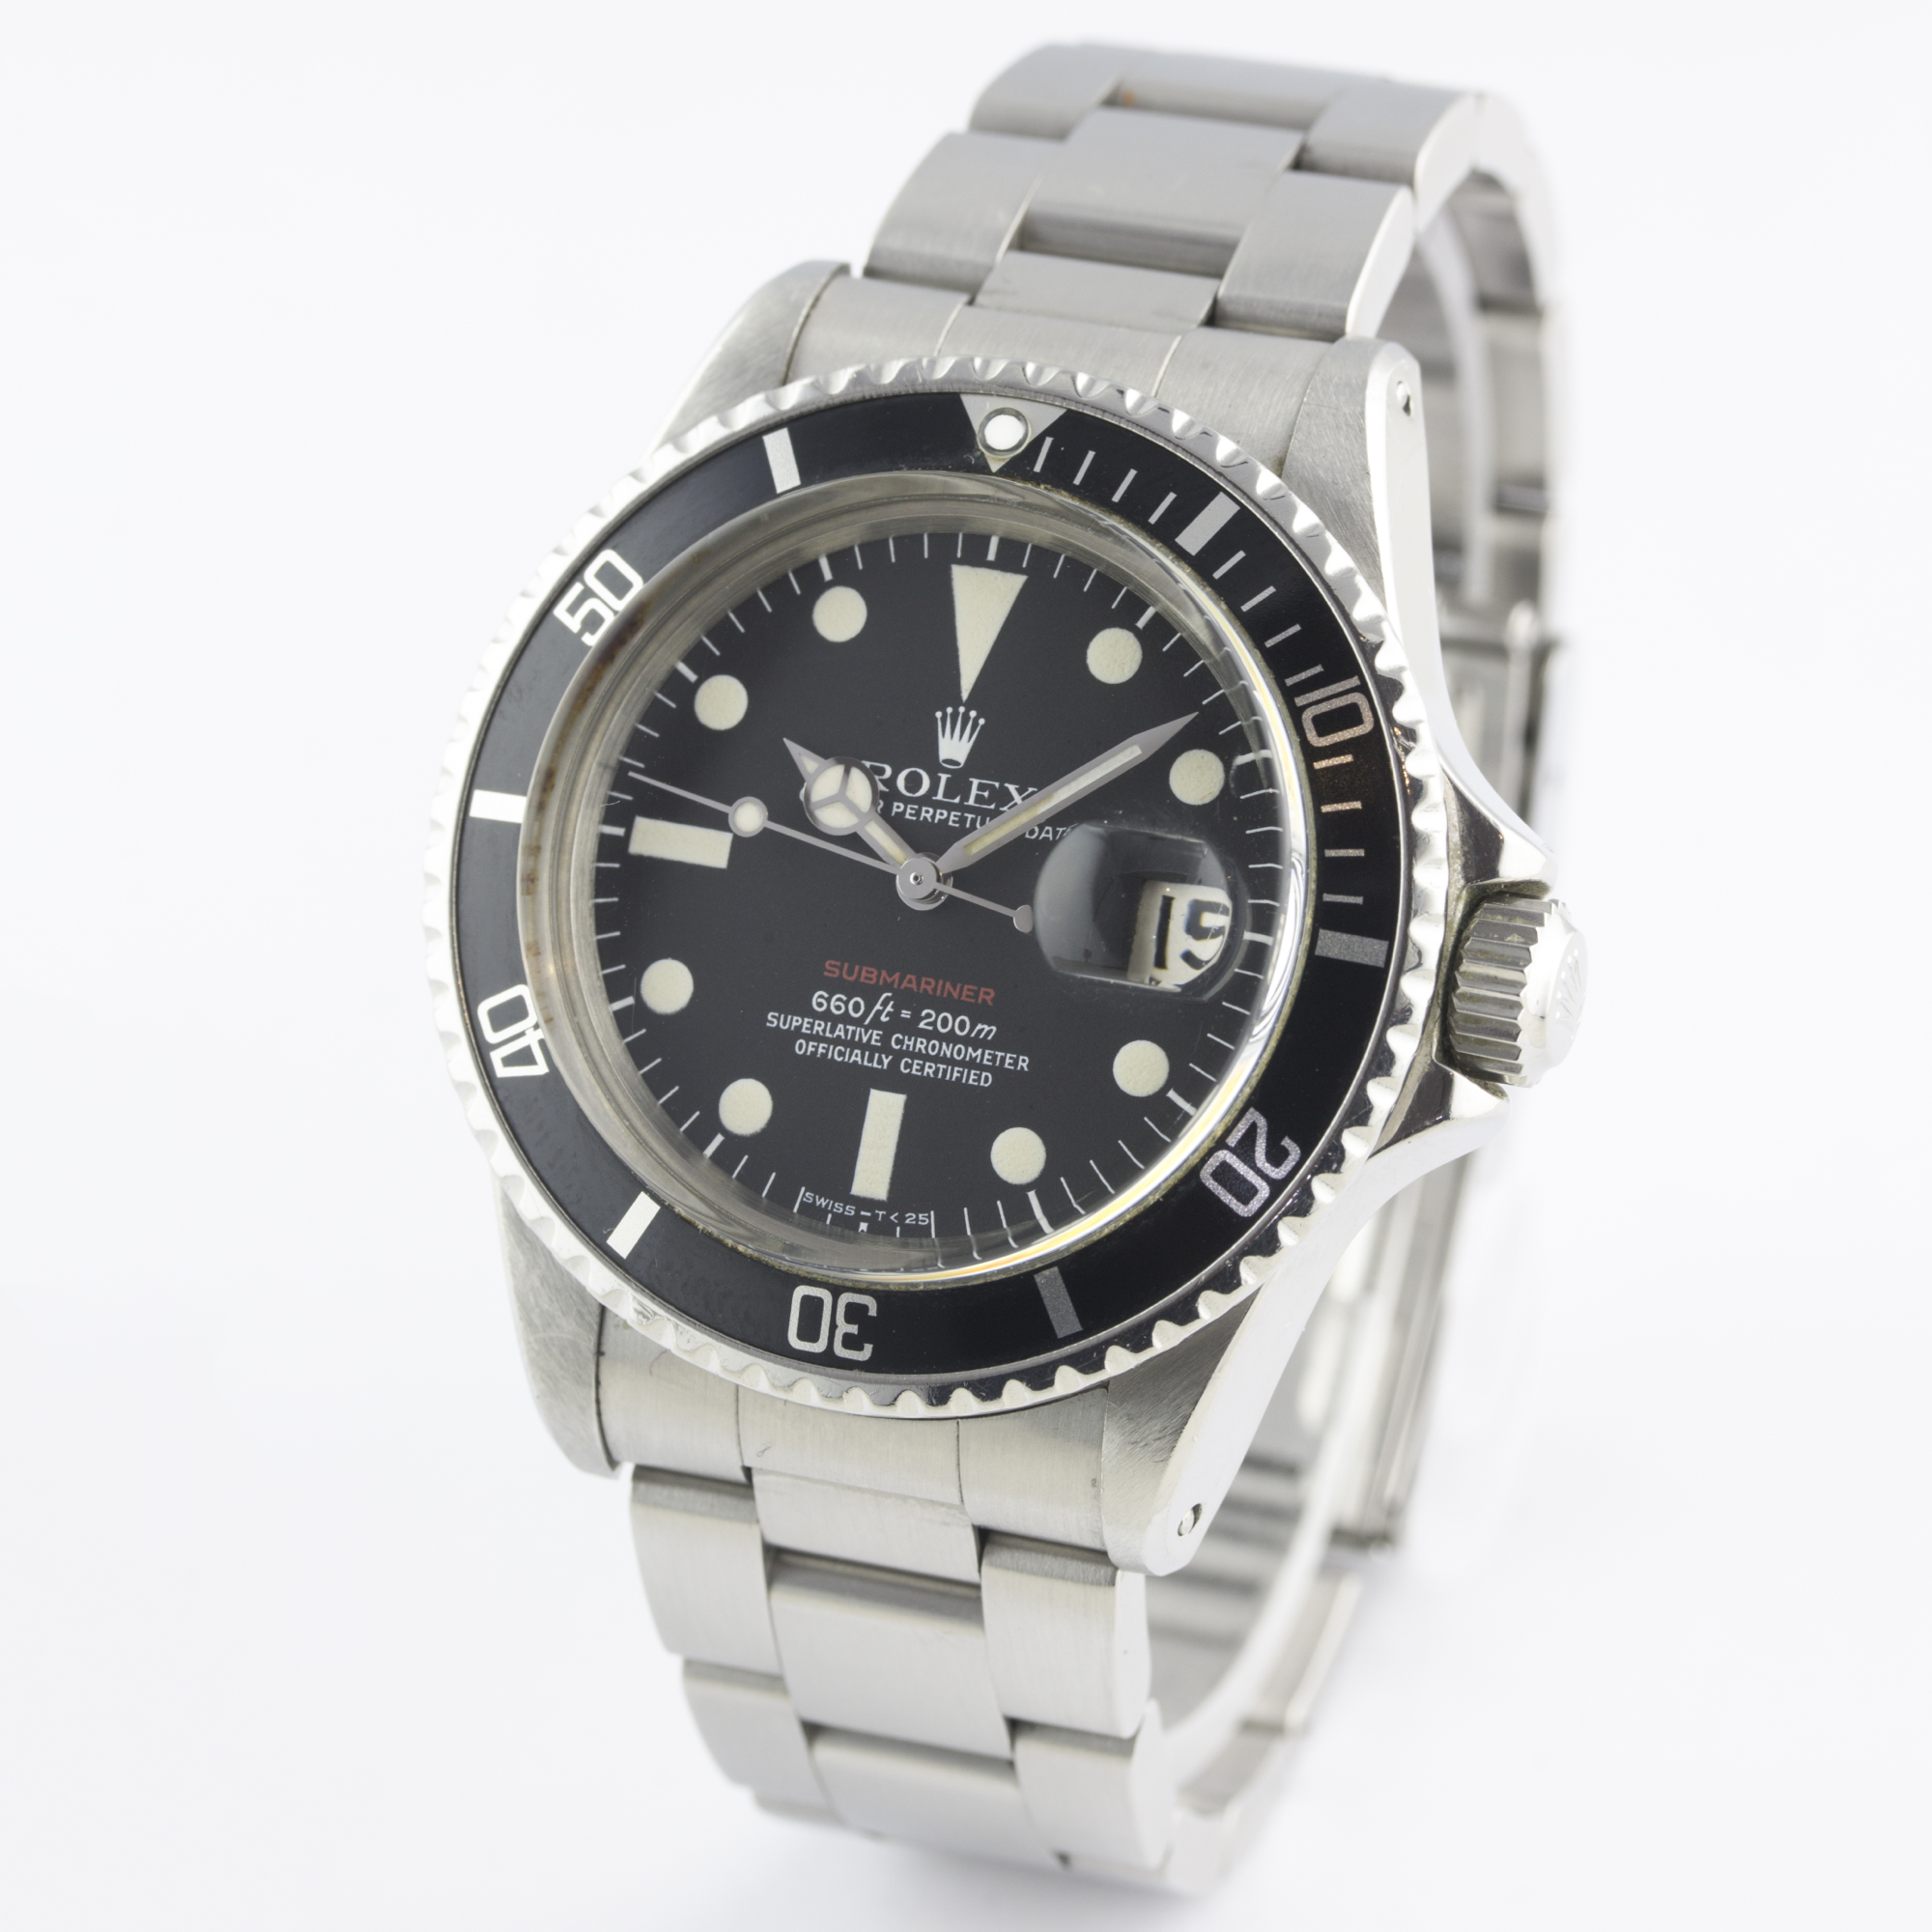 A RARE GENTLEMAN'S STAINLESS STEEL ROLEX OYSTER PERPETUAL DATE "RED WRITING" SUBMARINER BRACELET - Image 5 of 11